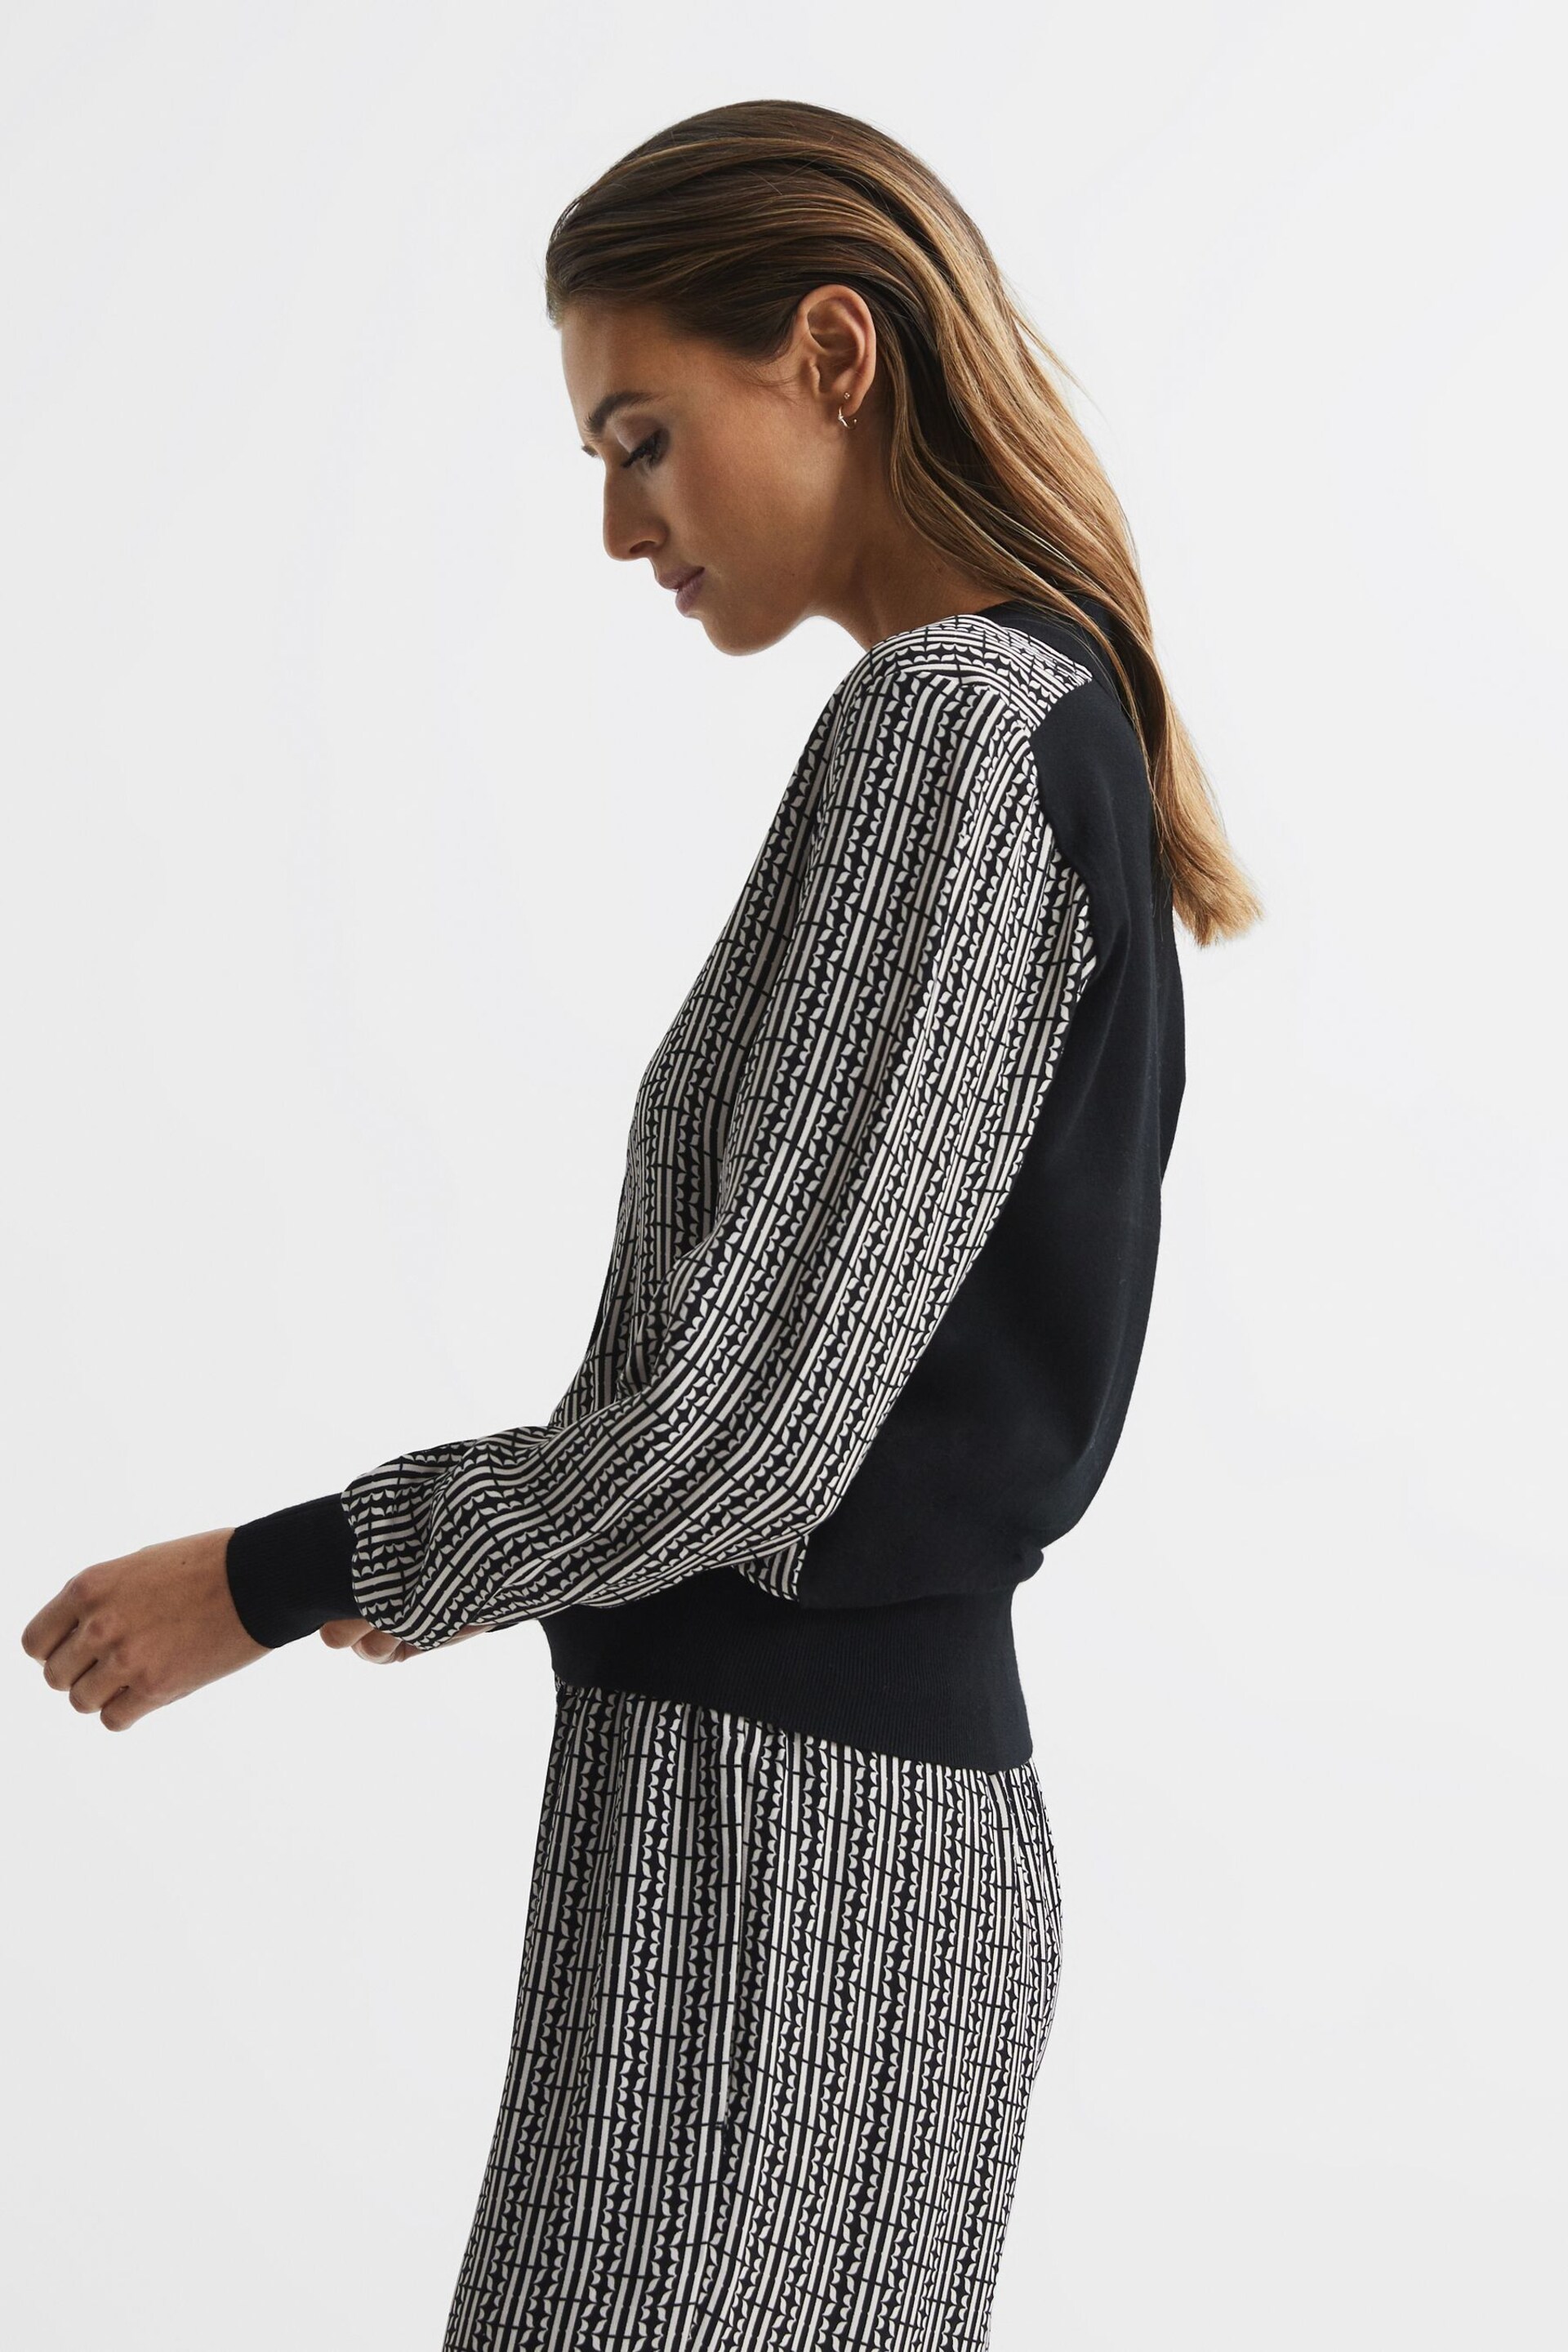 Reiss Black Olivia Printed Mix-Knitted Shirt - Image 7 of 7